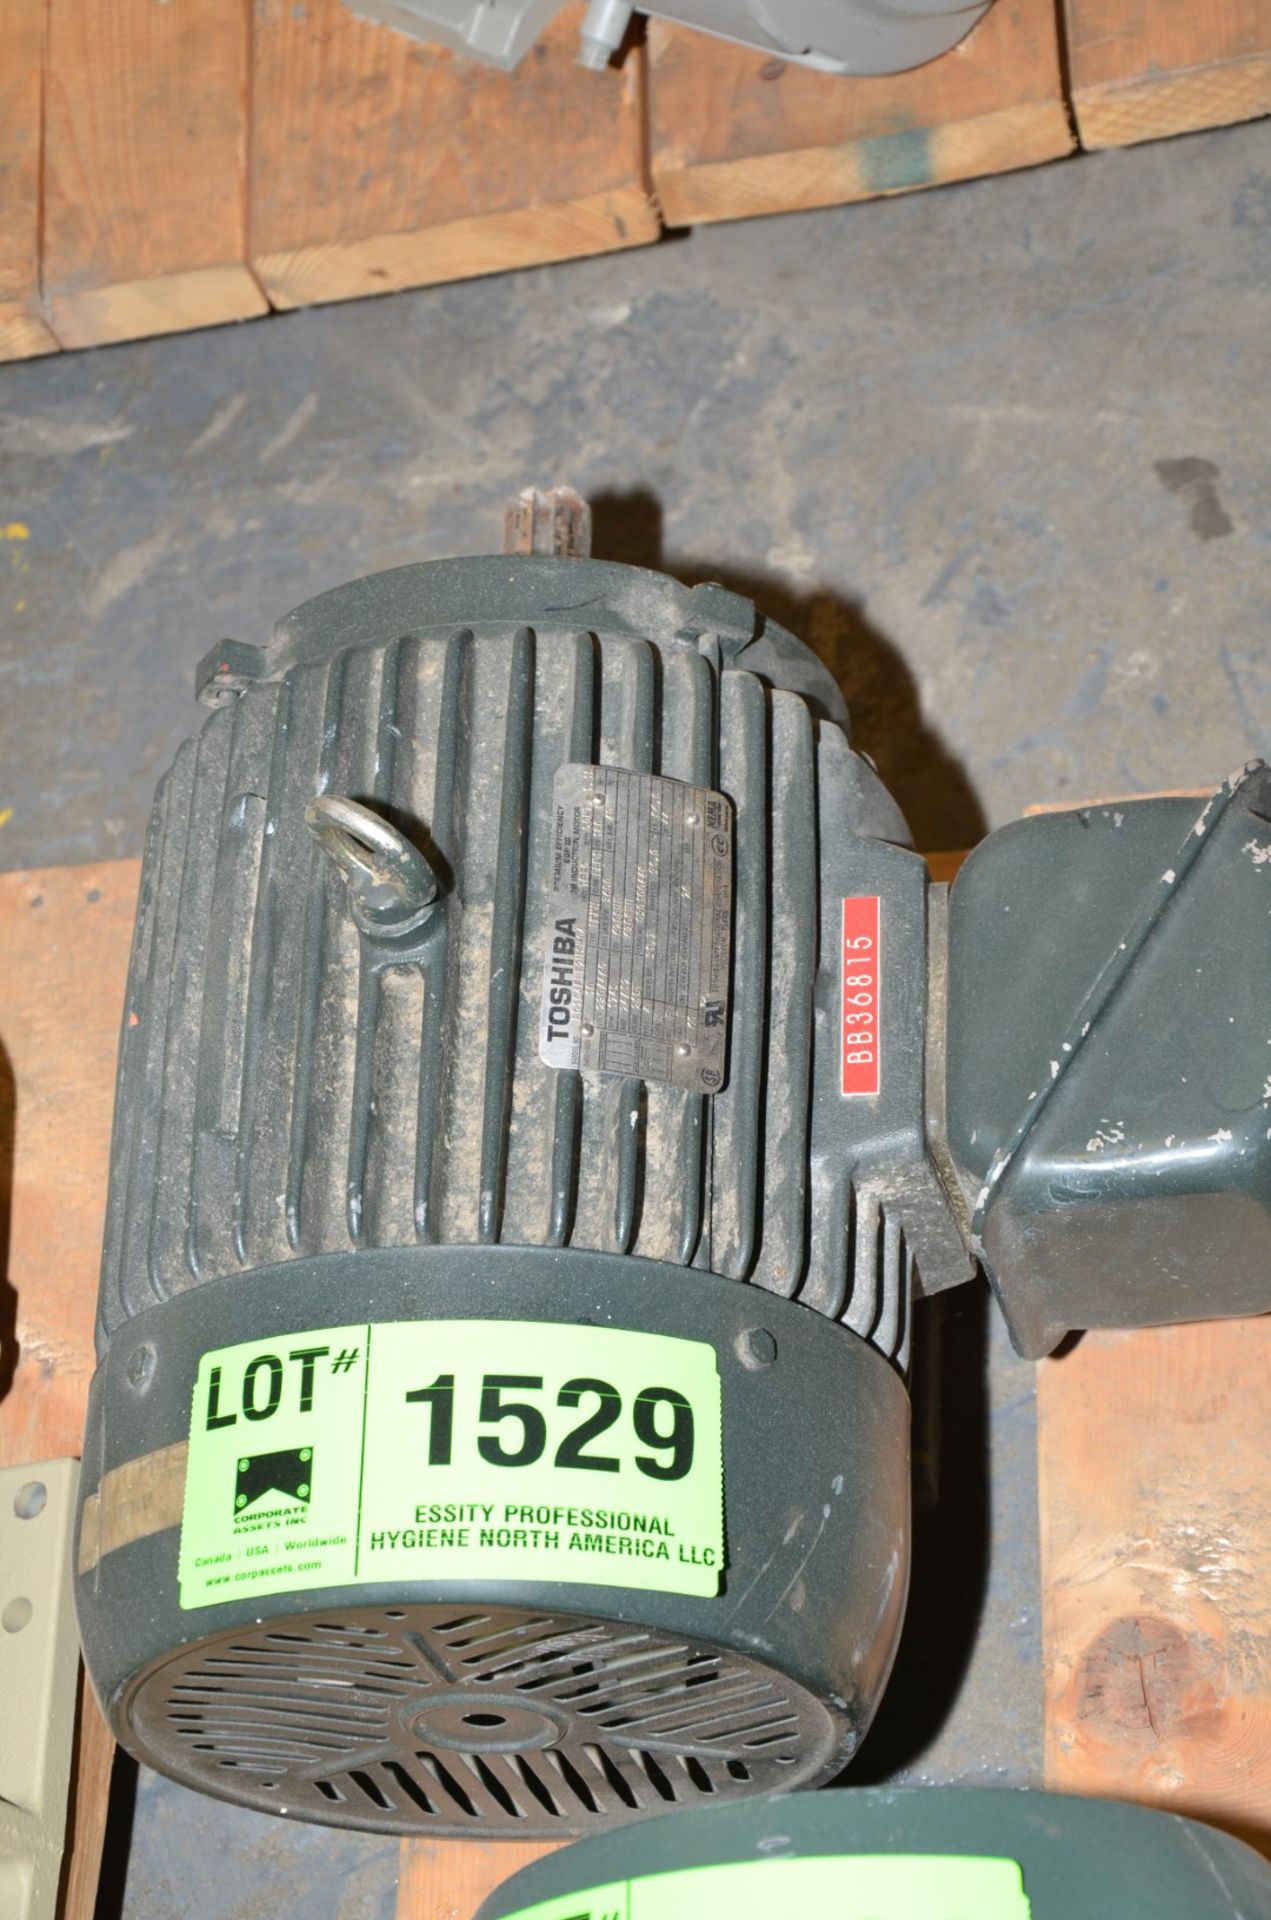 TOSHIBA 10 HP 1745 RPM 460V ELECTRIC MOTOR [RIGGING FEE FOR LOT #1529 - $25 USD PLUS APPLICABLE